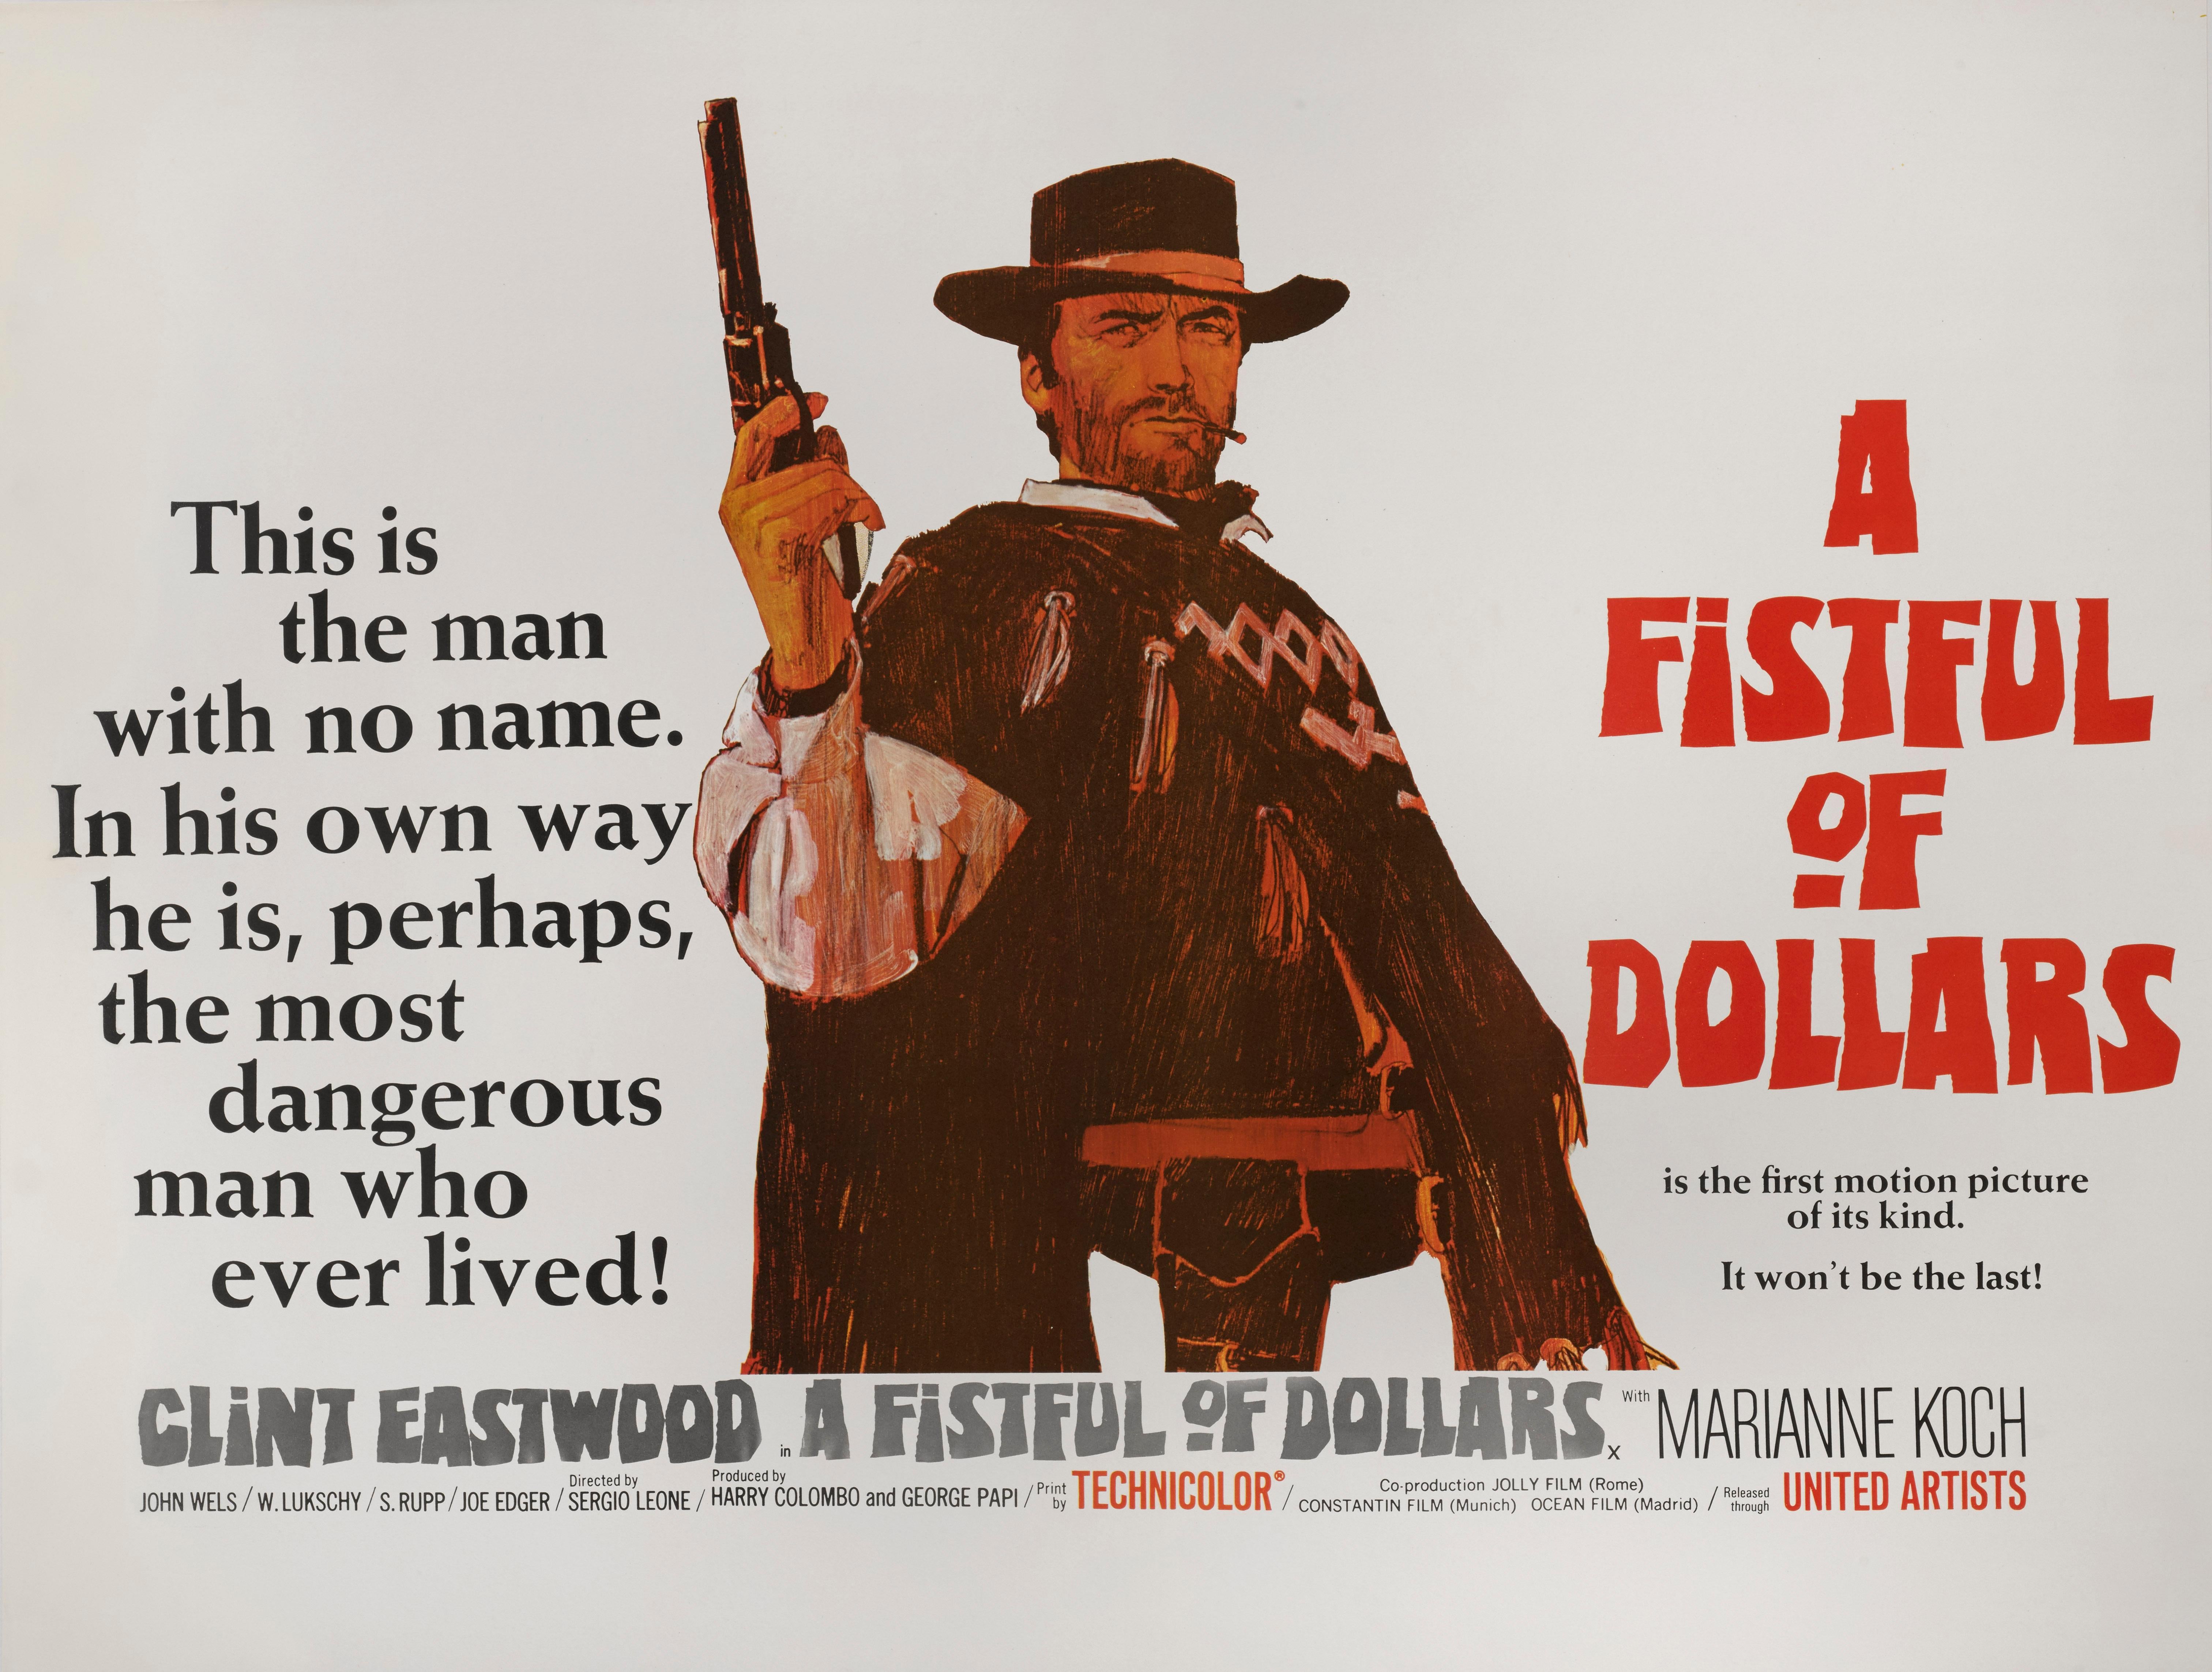 Original British film poster for Fistful of Dollars 1964.
This film was a remake of Akira Kurosawa's 1961 film Yojimbo. This film launched the dollar trilogy and establishing Leone and Eastwood's careers.